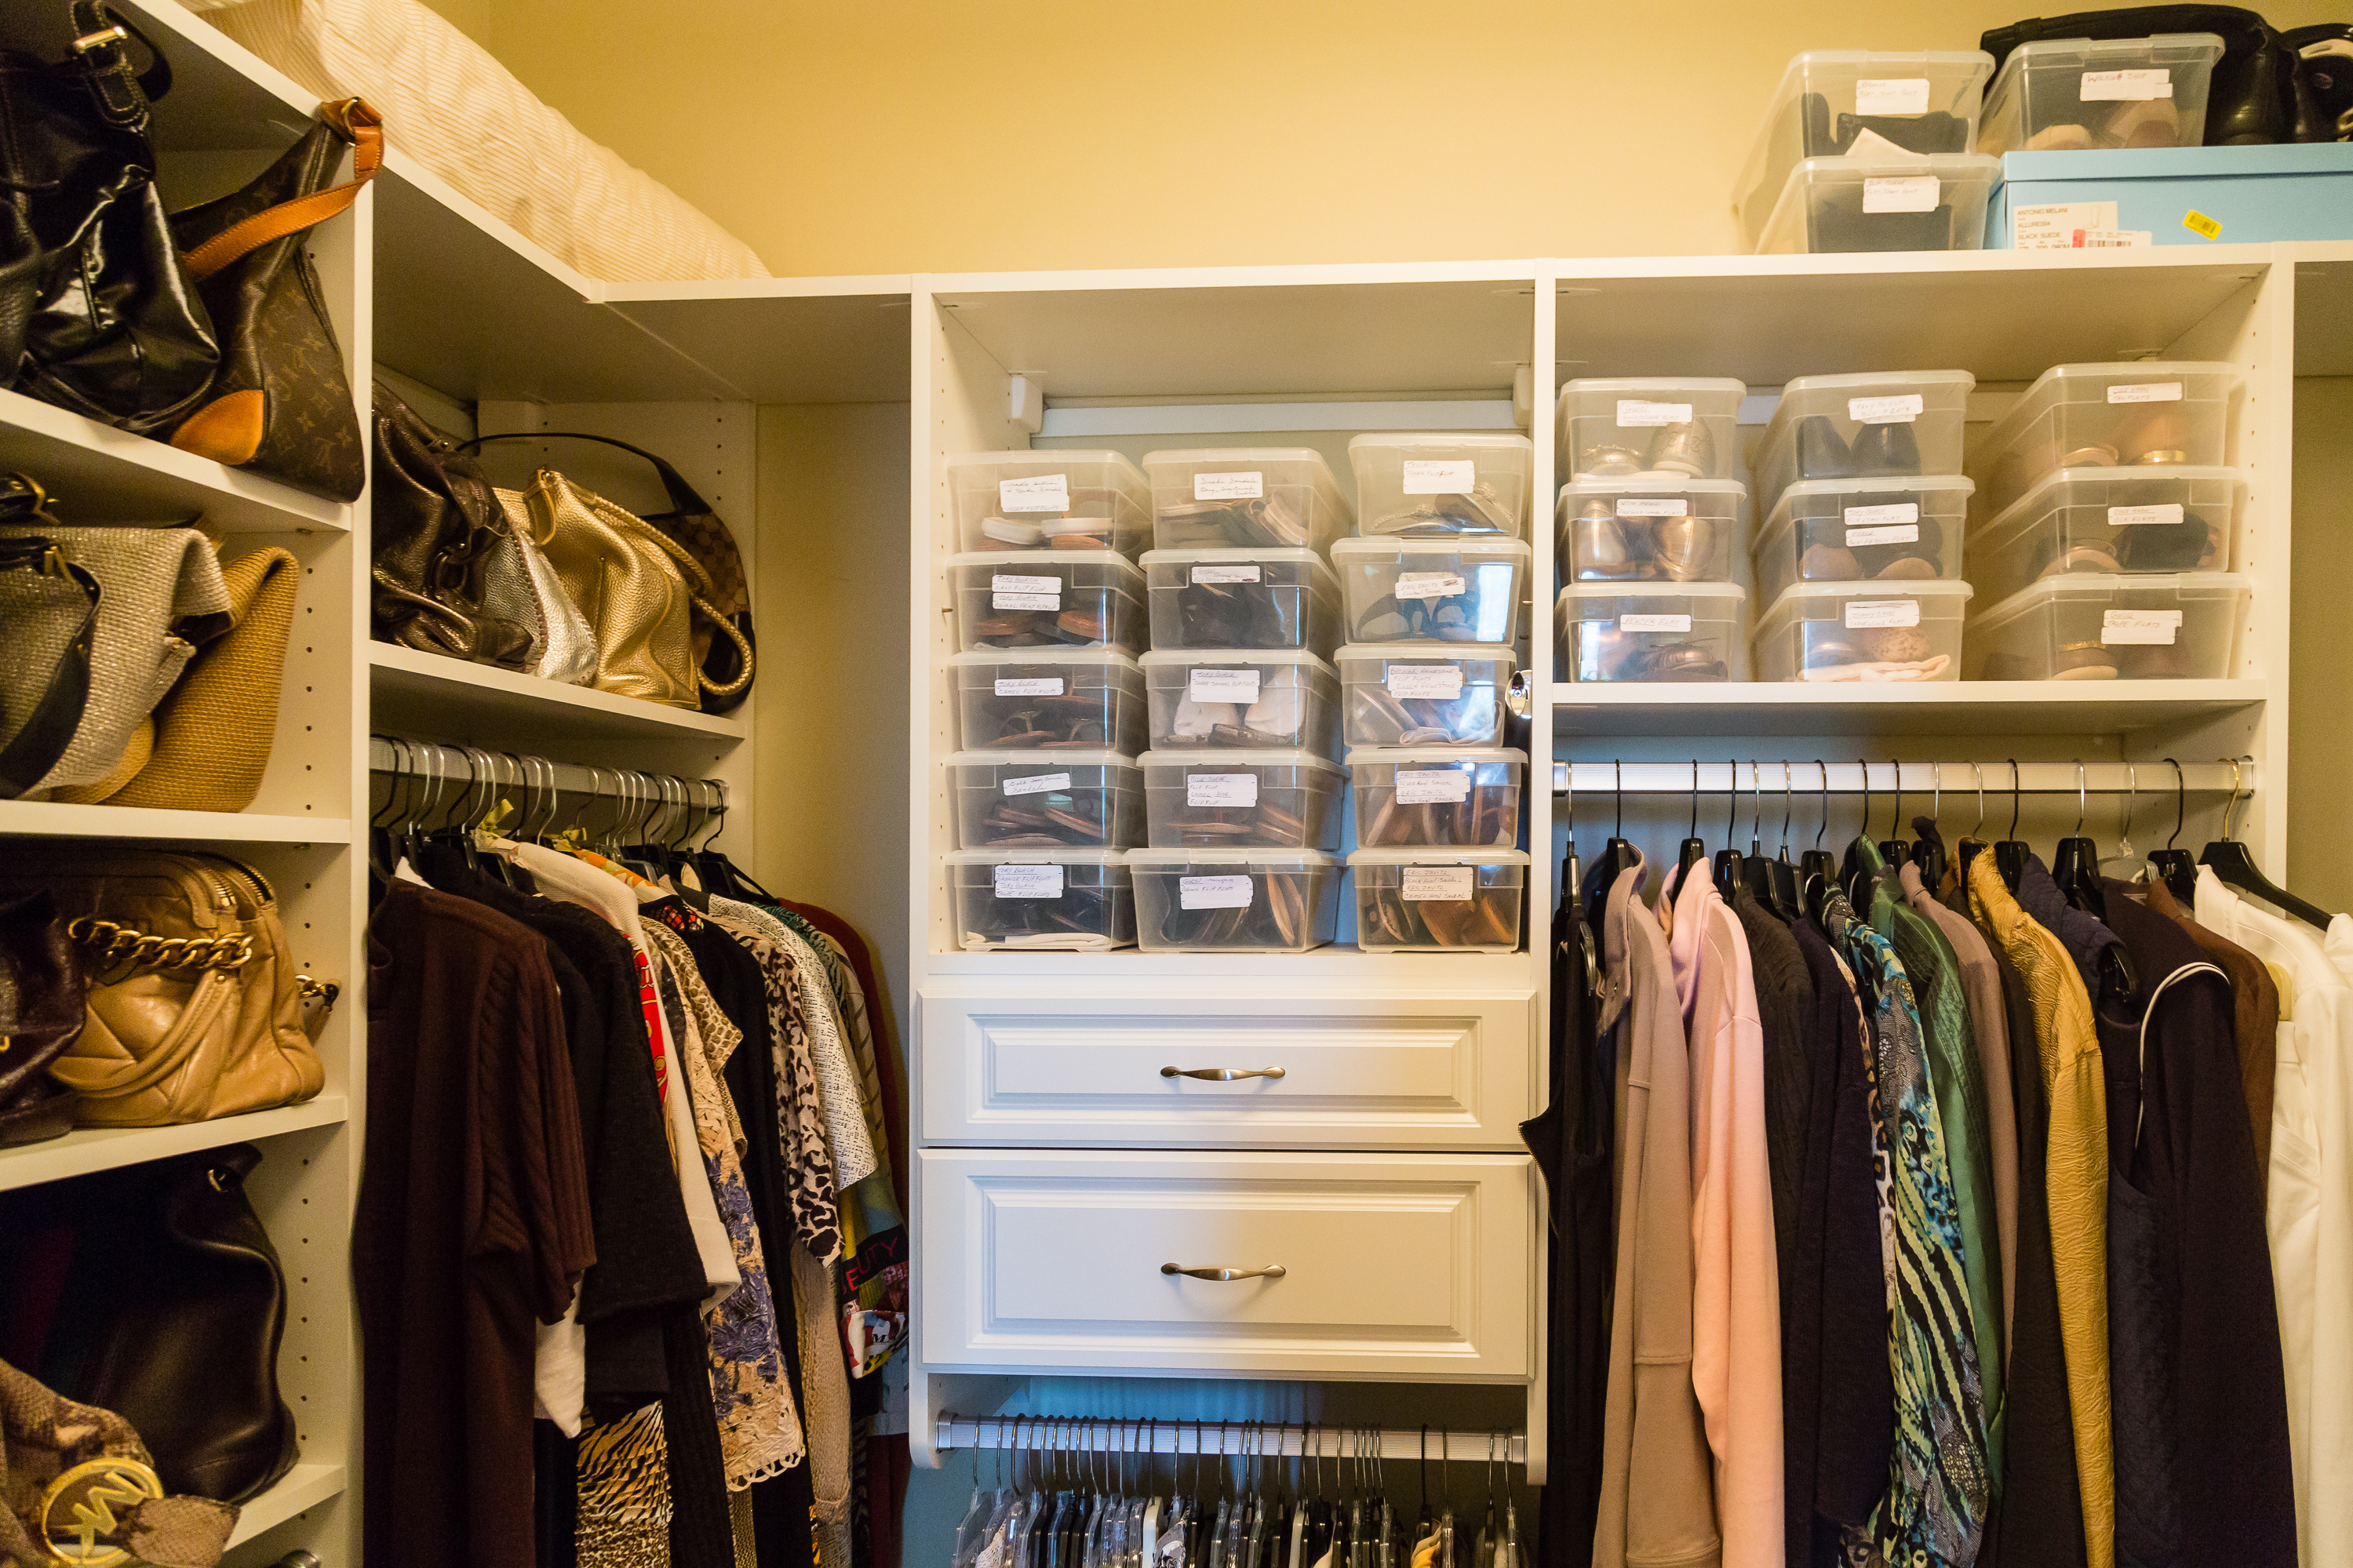 It’s Time to Hire a Professional Organizer When You Notice These 3 Things